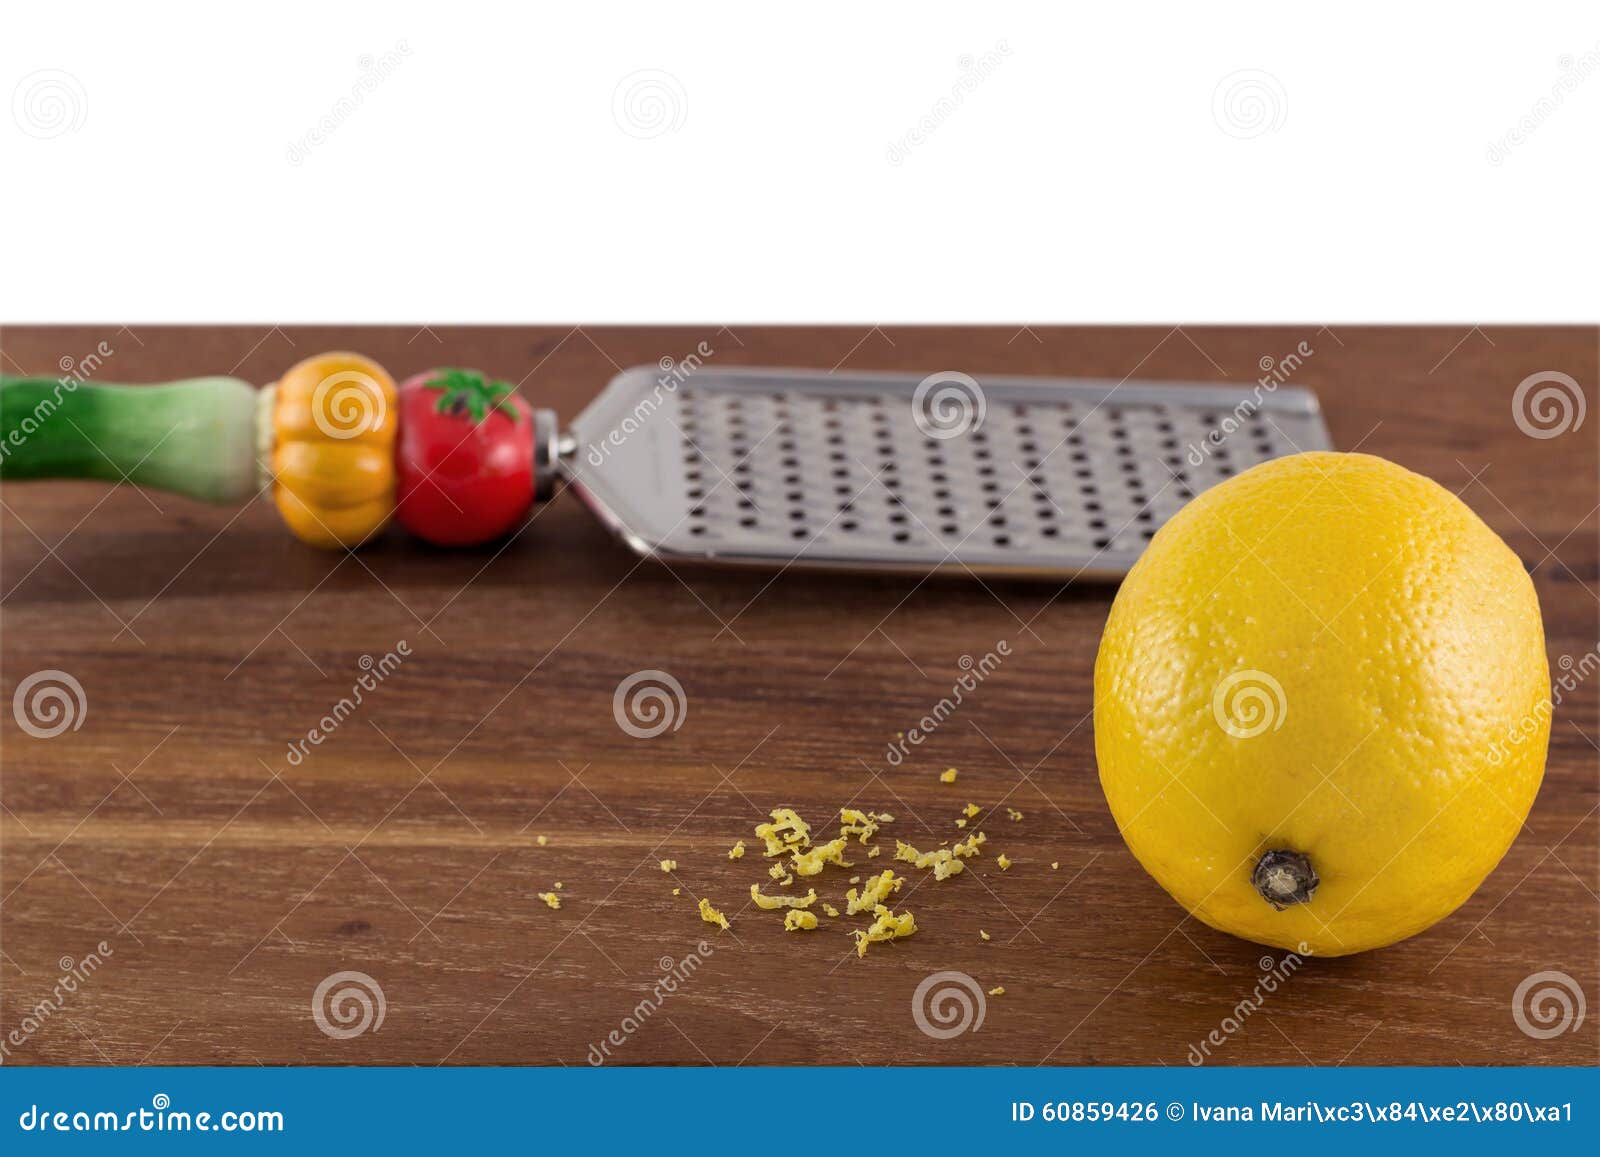 Lemon with zest and grater stock photo. Image of utensil - 60859426